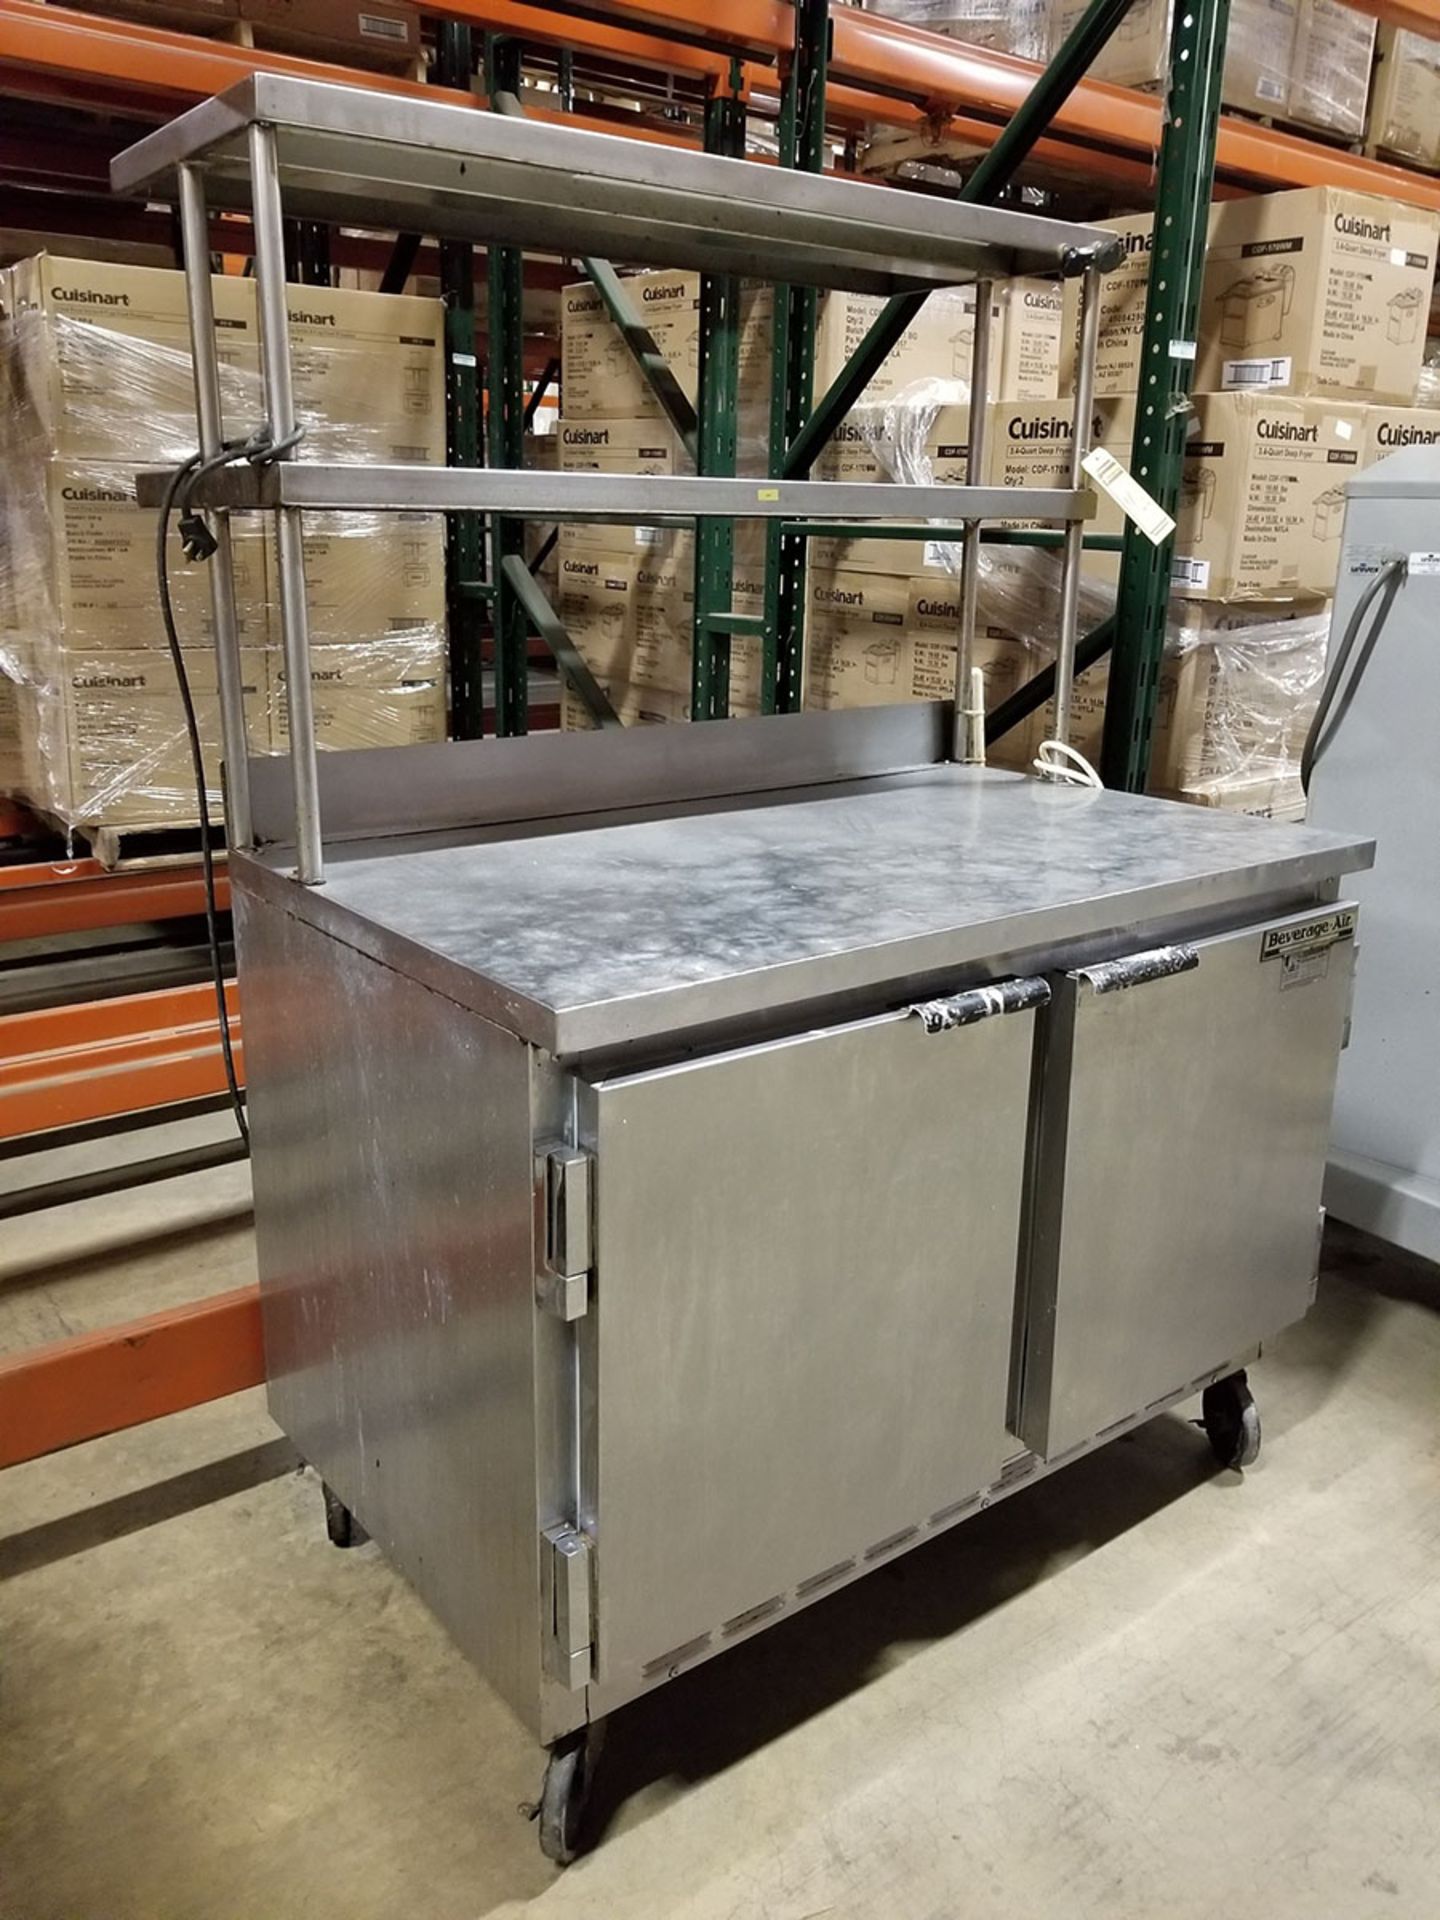 BEVERAGE AIR REFRIGERATED STAINLESS STEEL PREP TABLE, 48’’ X 29’’ X 36’’, 2-DOOR - Image 2 of 6